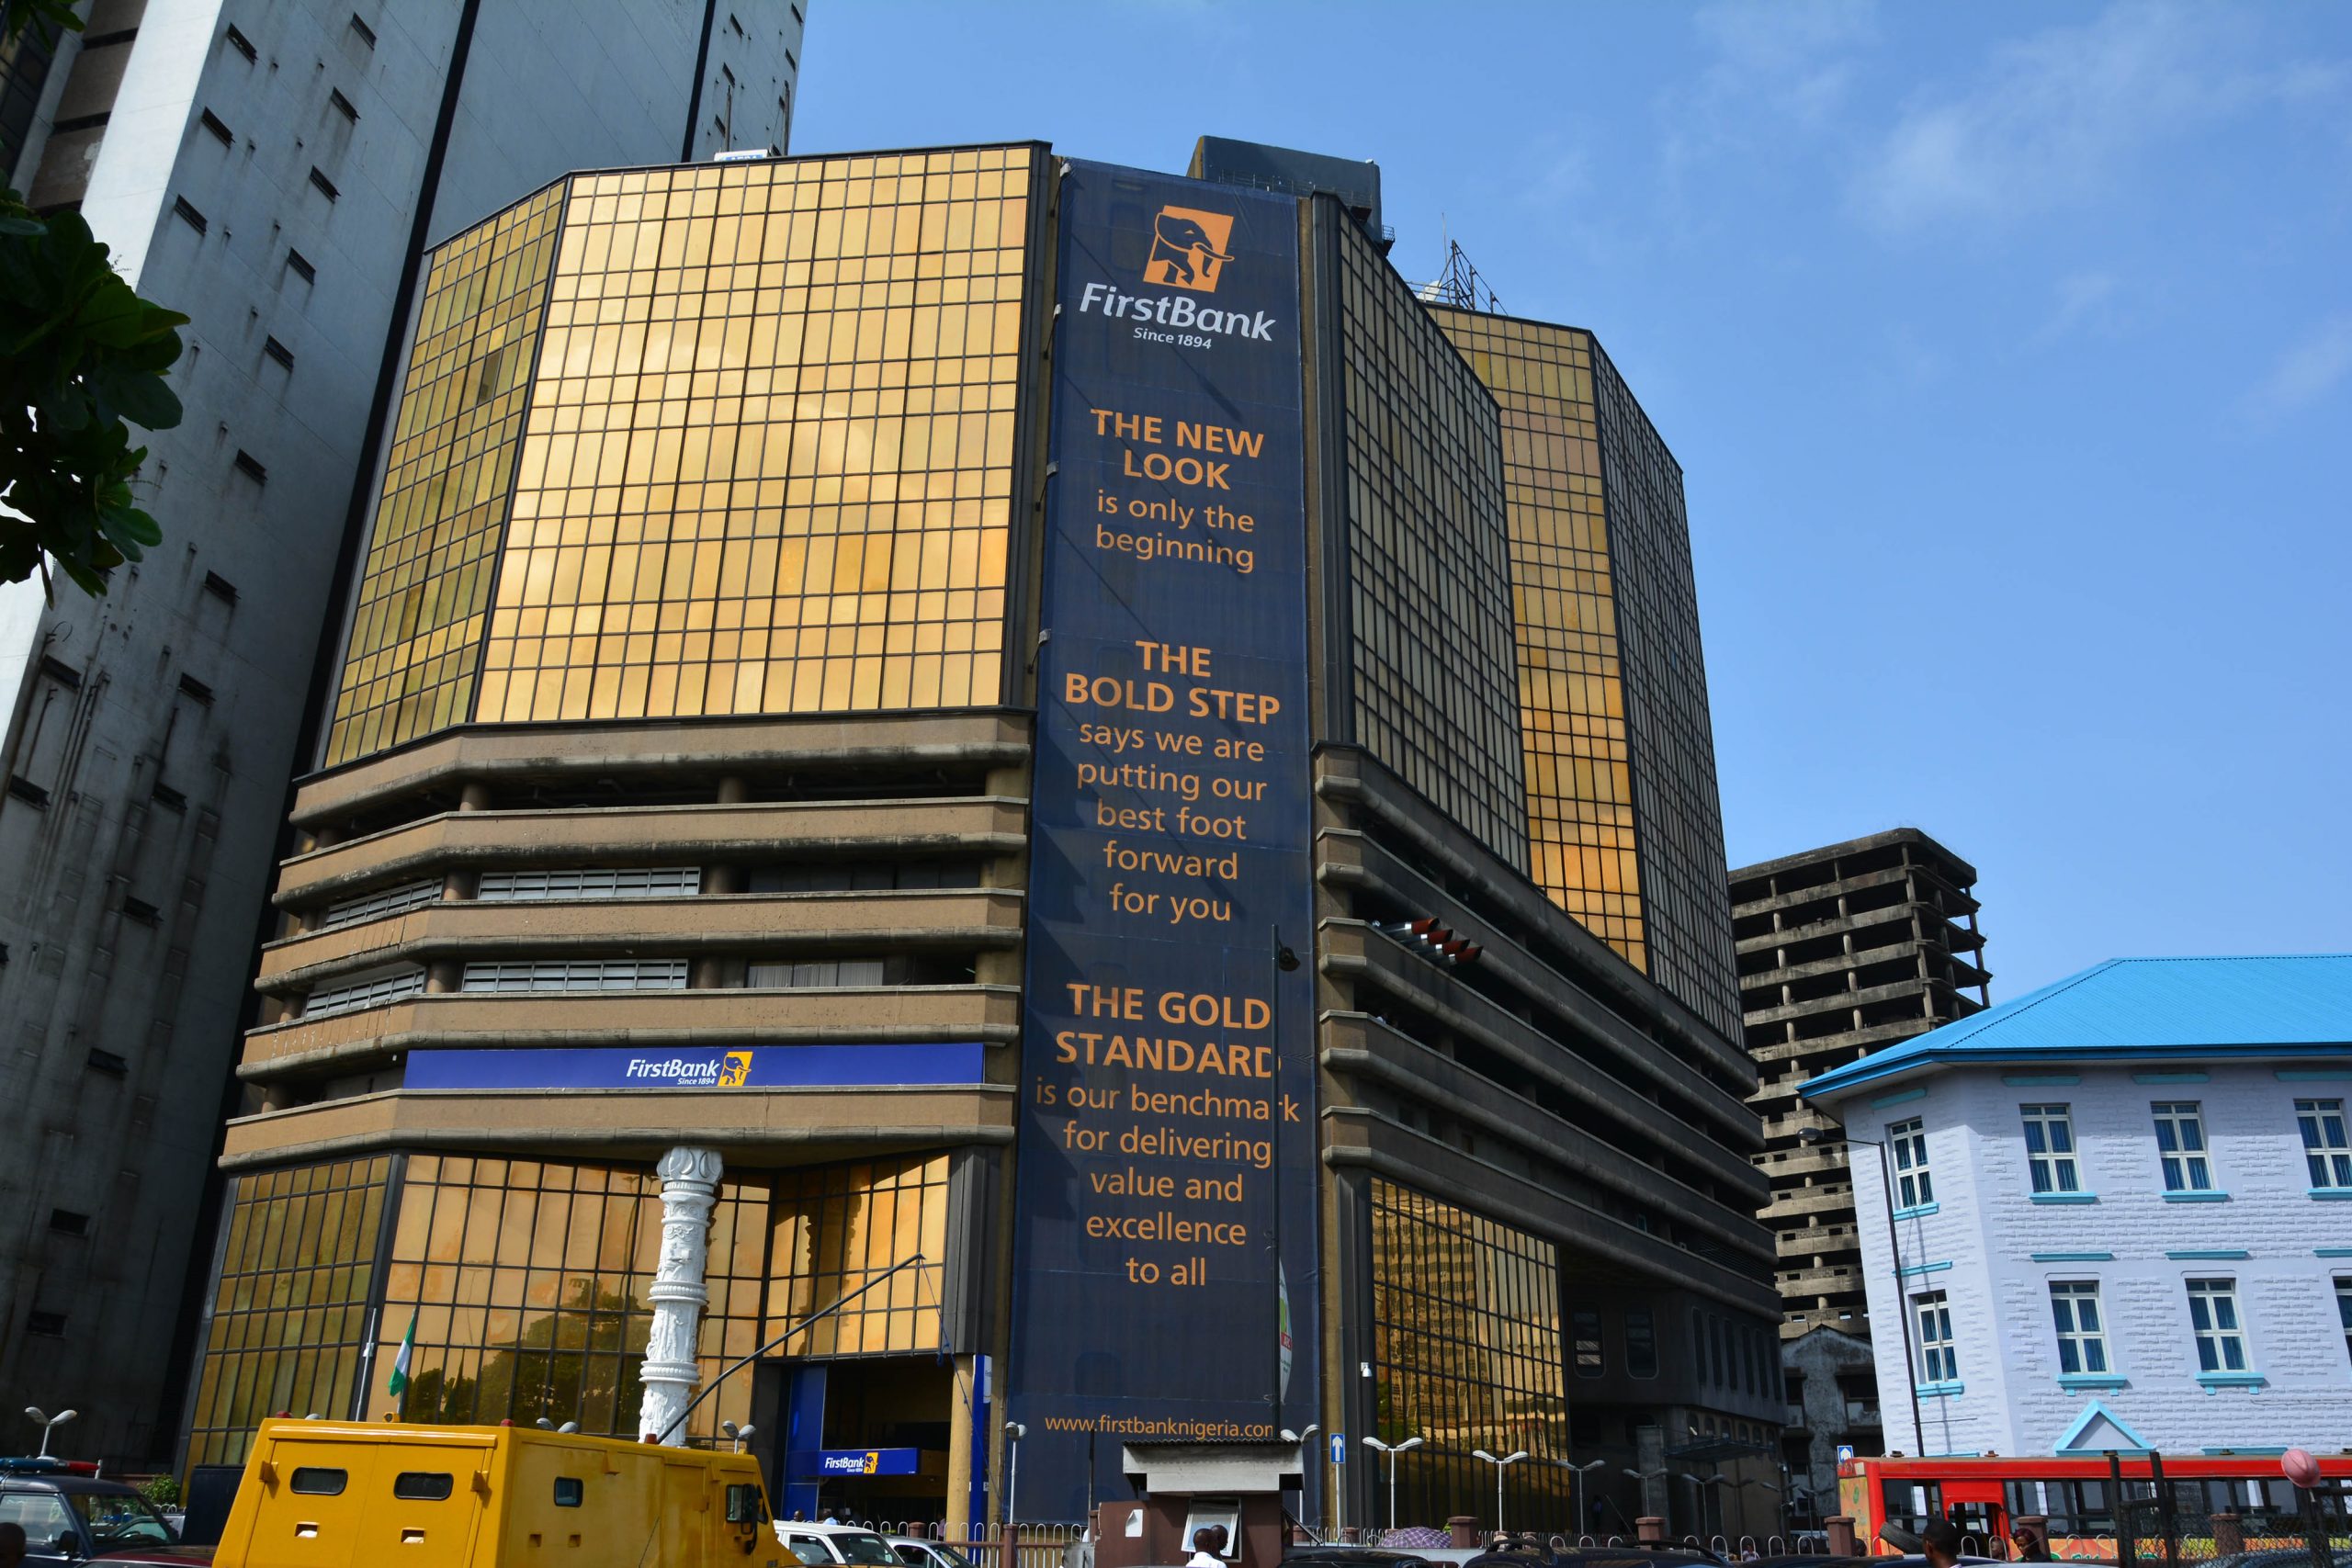 FIRSTBANK IMPACTS ITS FIRSTMONIE AGENTS WITH A 100 BILLION NAIRA LOAN